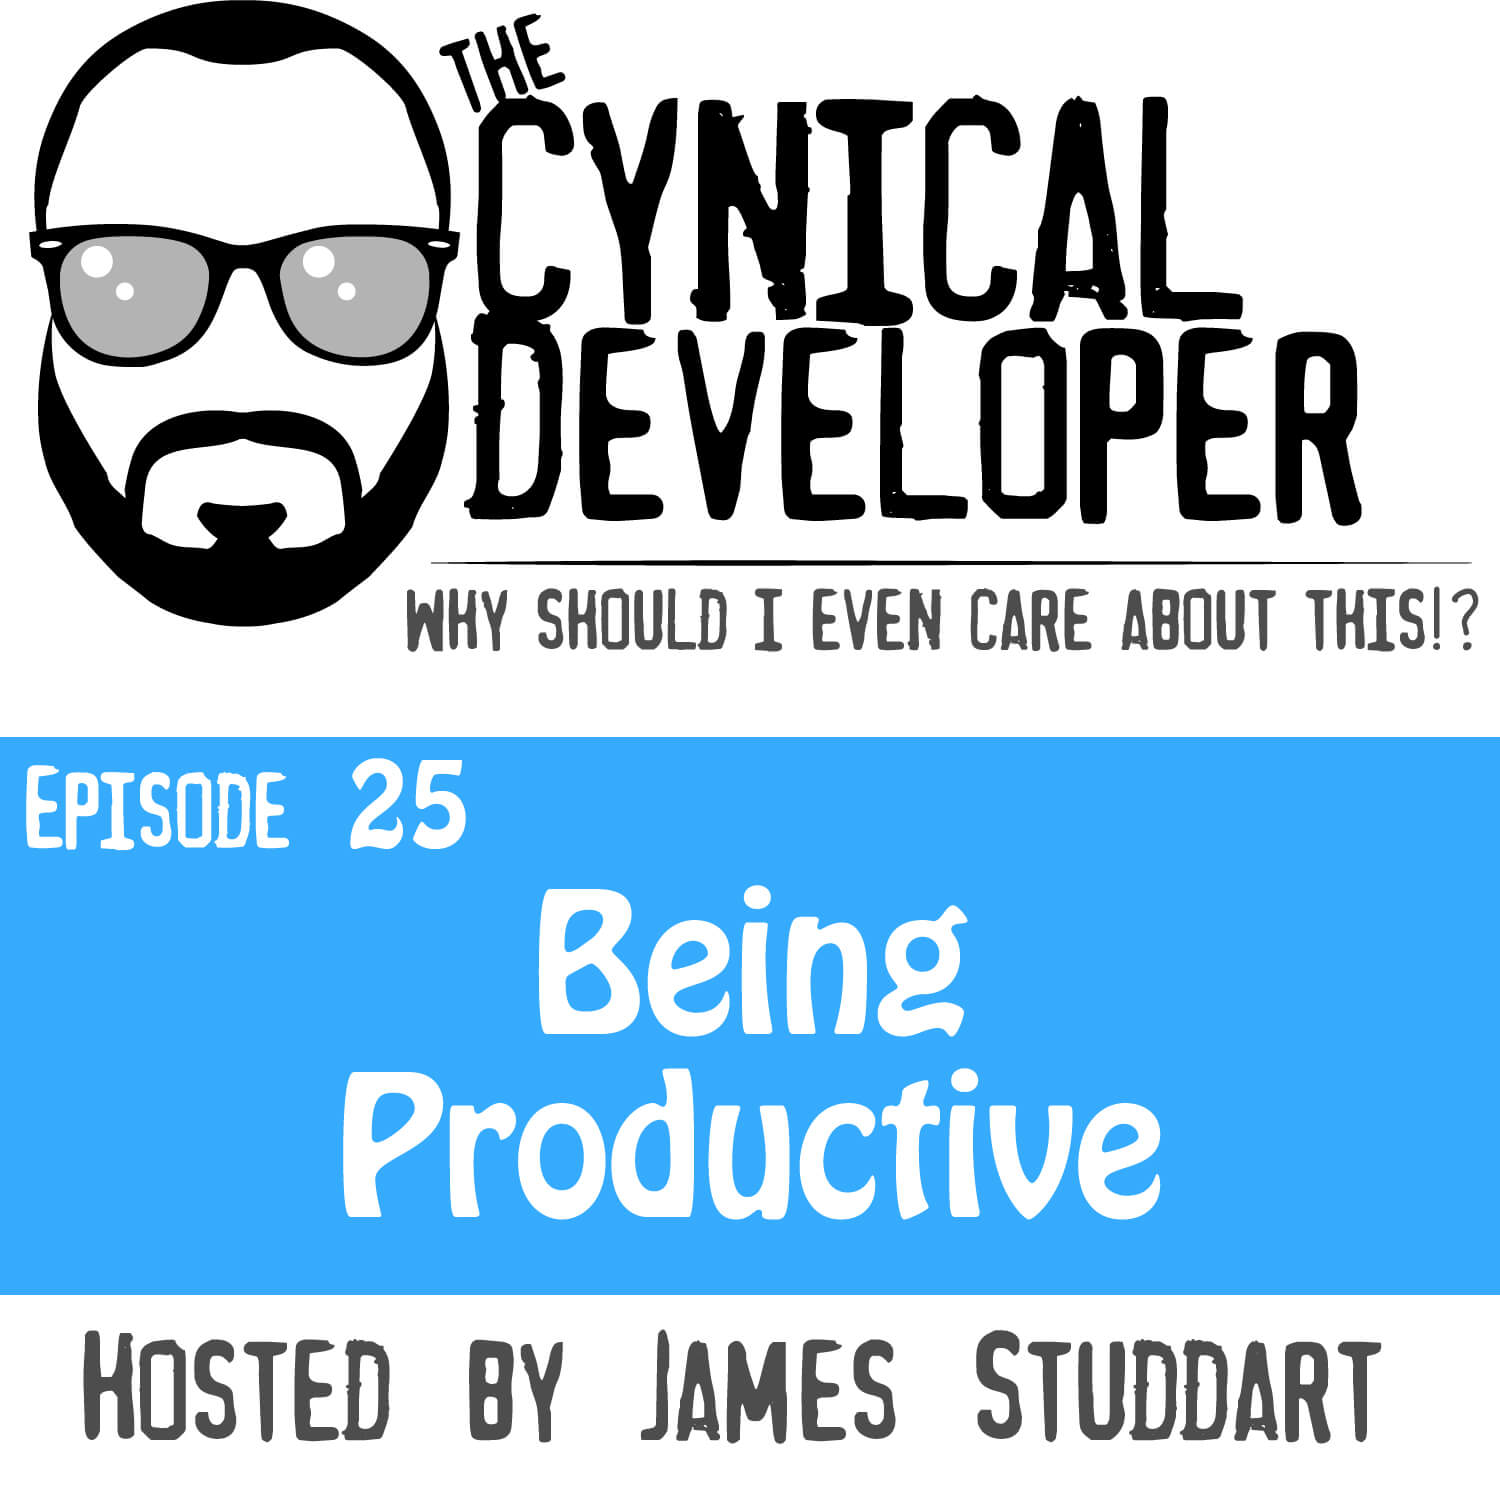 Episode 25 - Being Productive